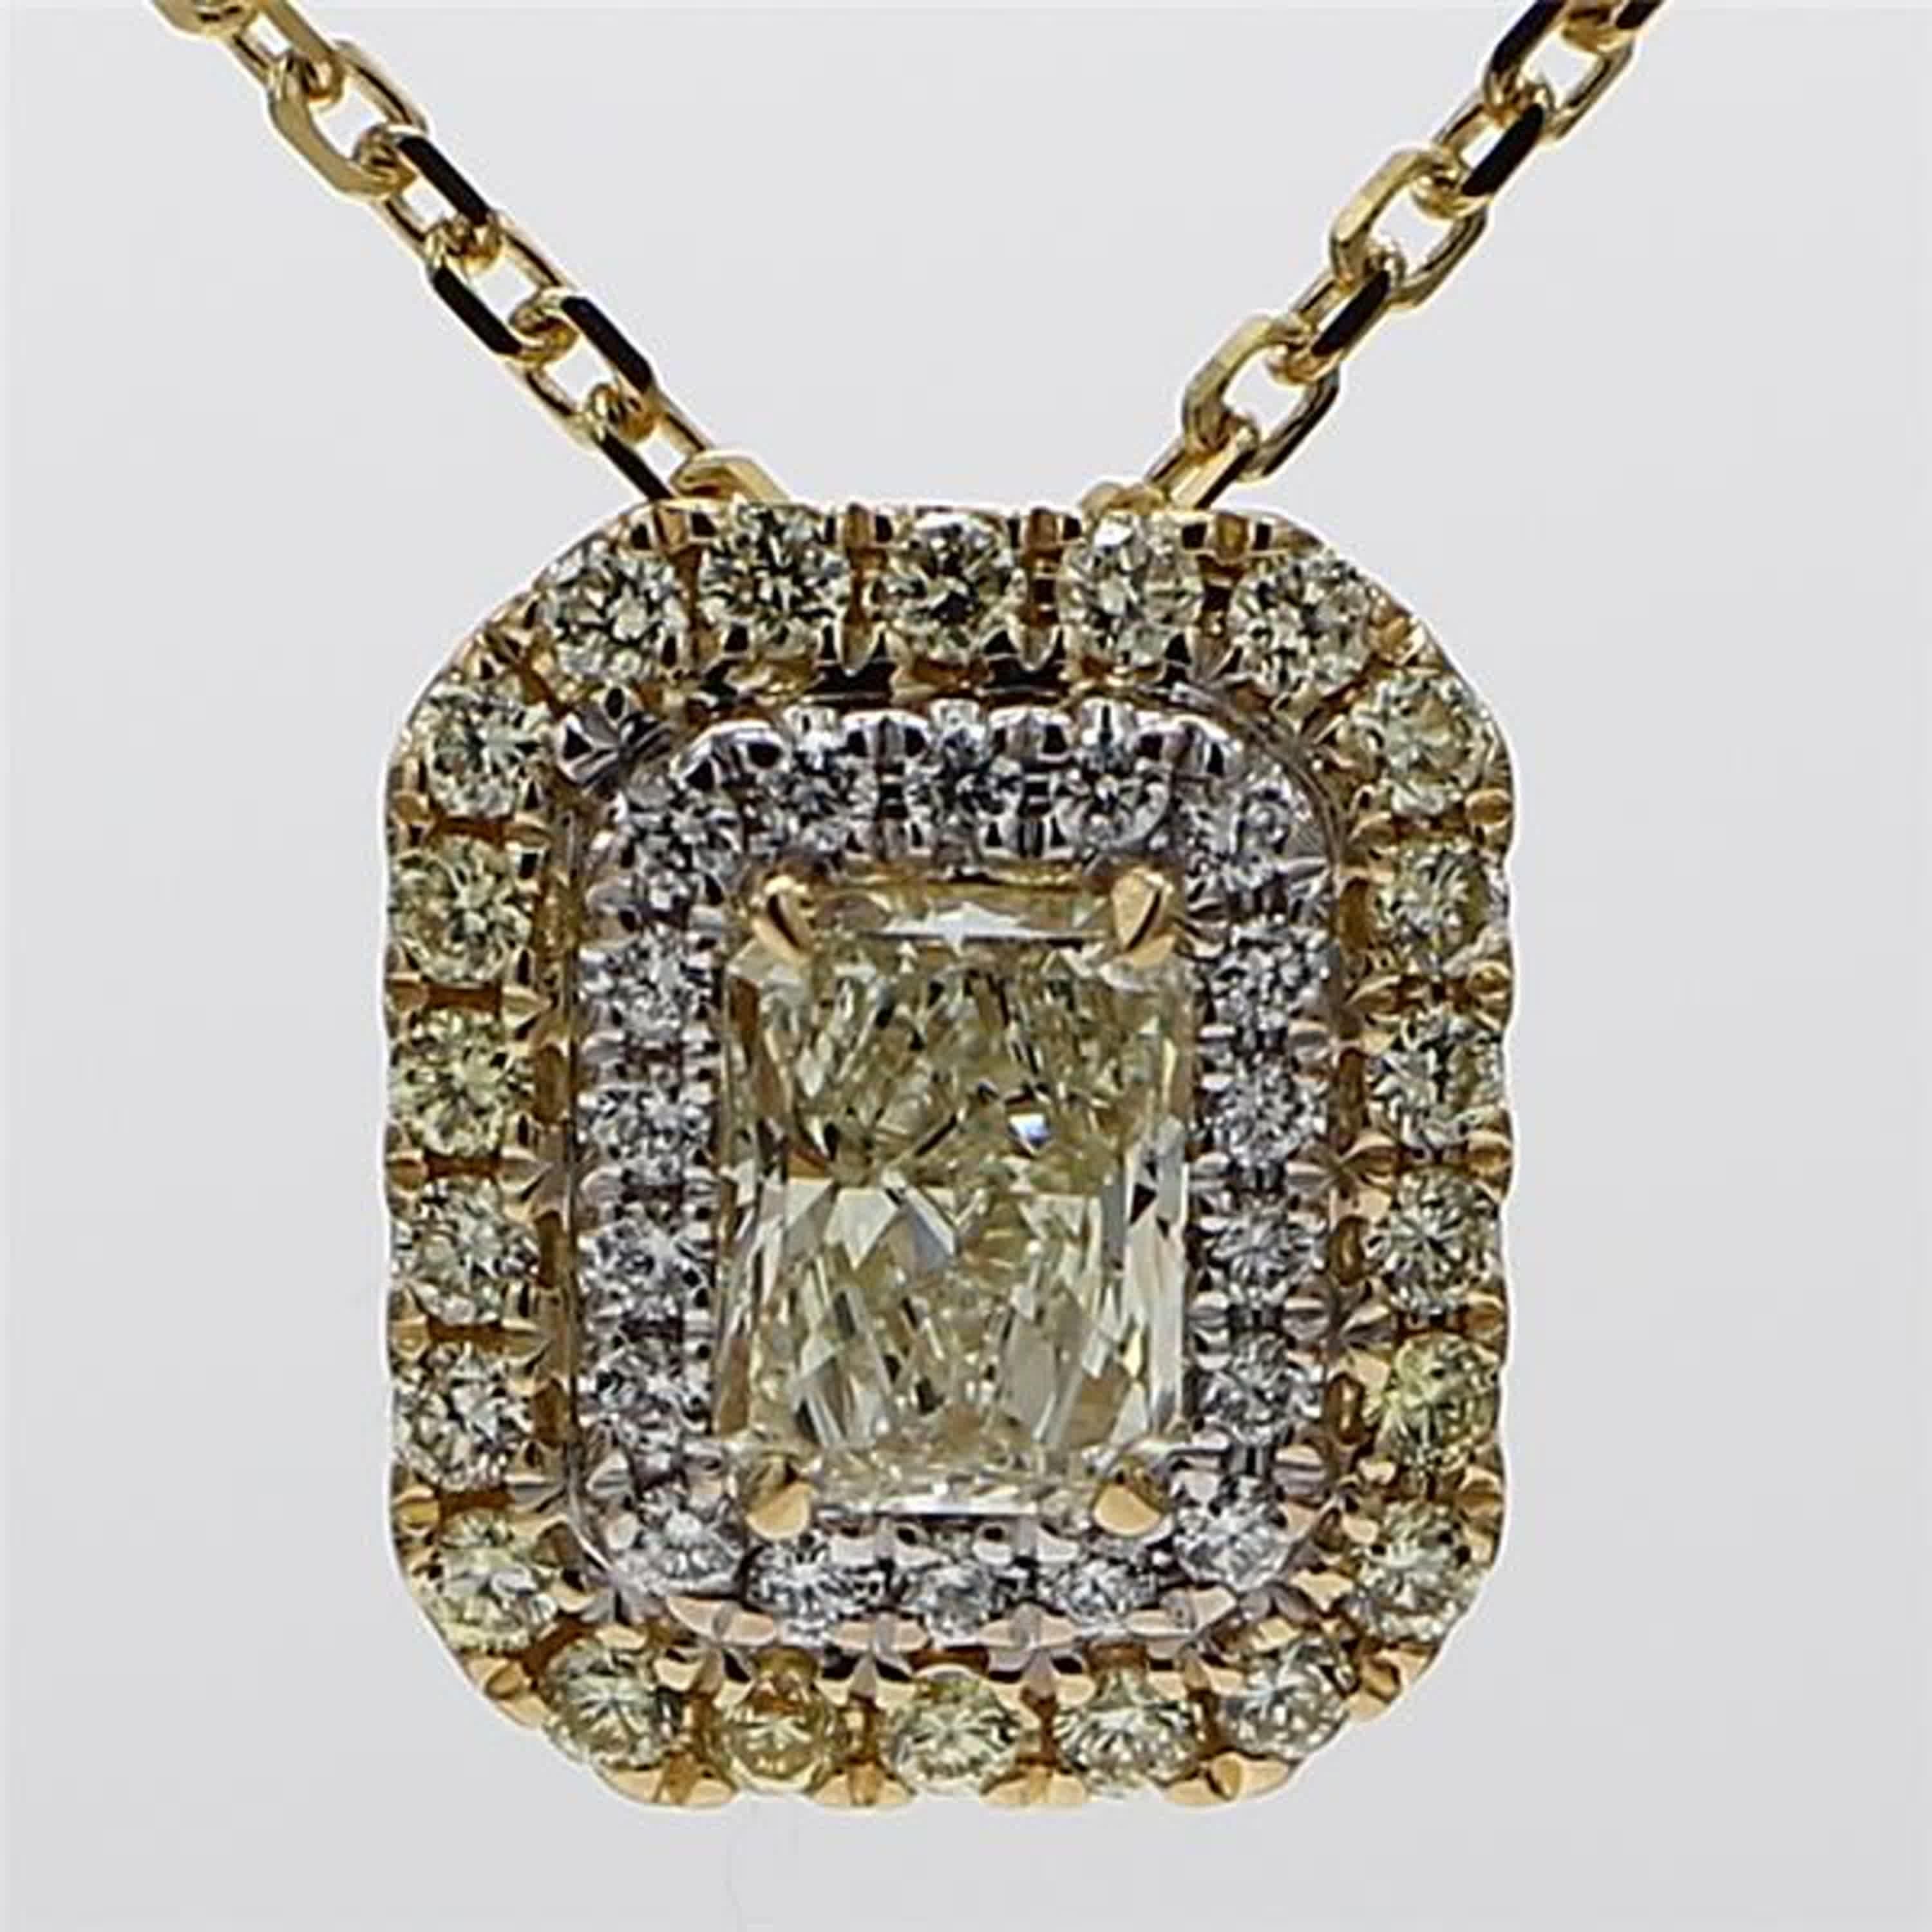 RareGemWorld's classic GIA certified diamond pendant. Mounted in a beautiful 18K Yellow and White Gold setting with a natural radiant cut yellow diamond. The yellow diamond is surrounded by round natural yellow diamond melee and round natural white